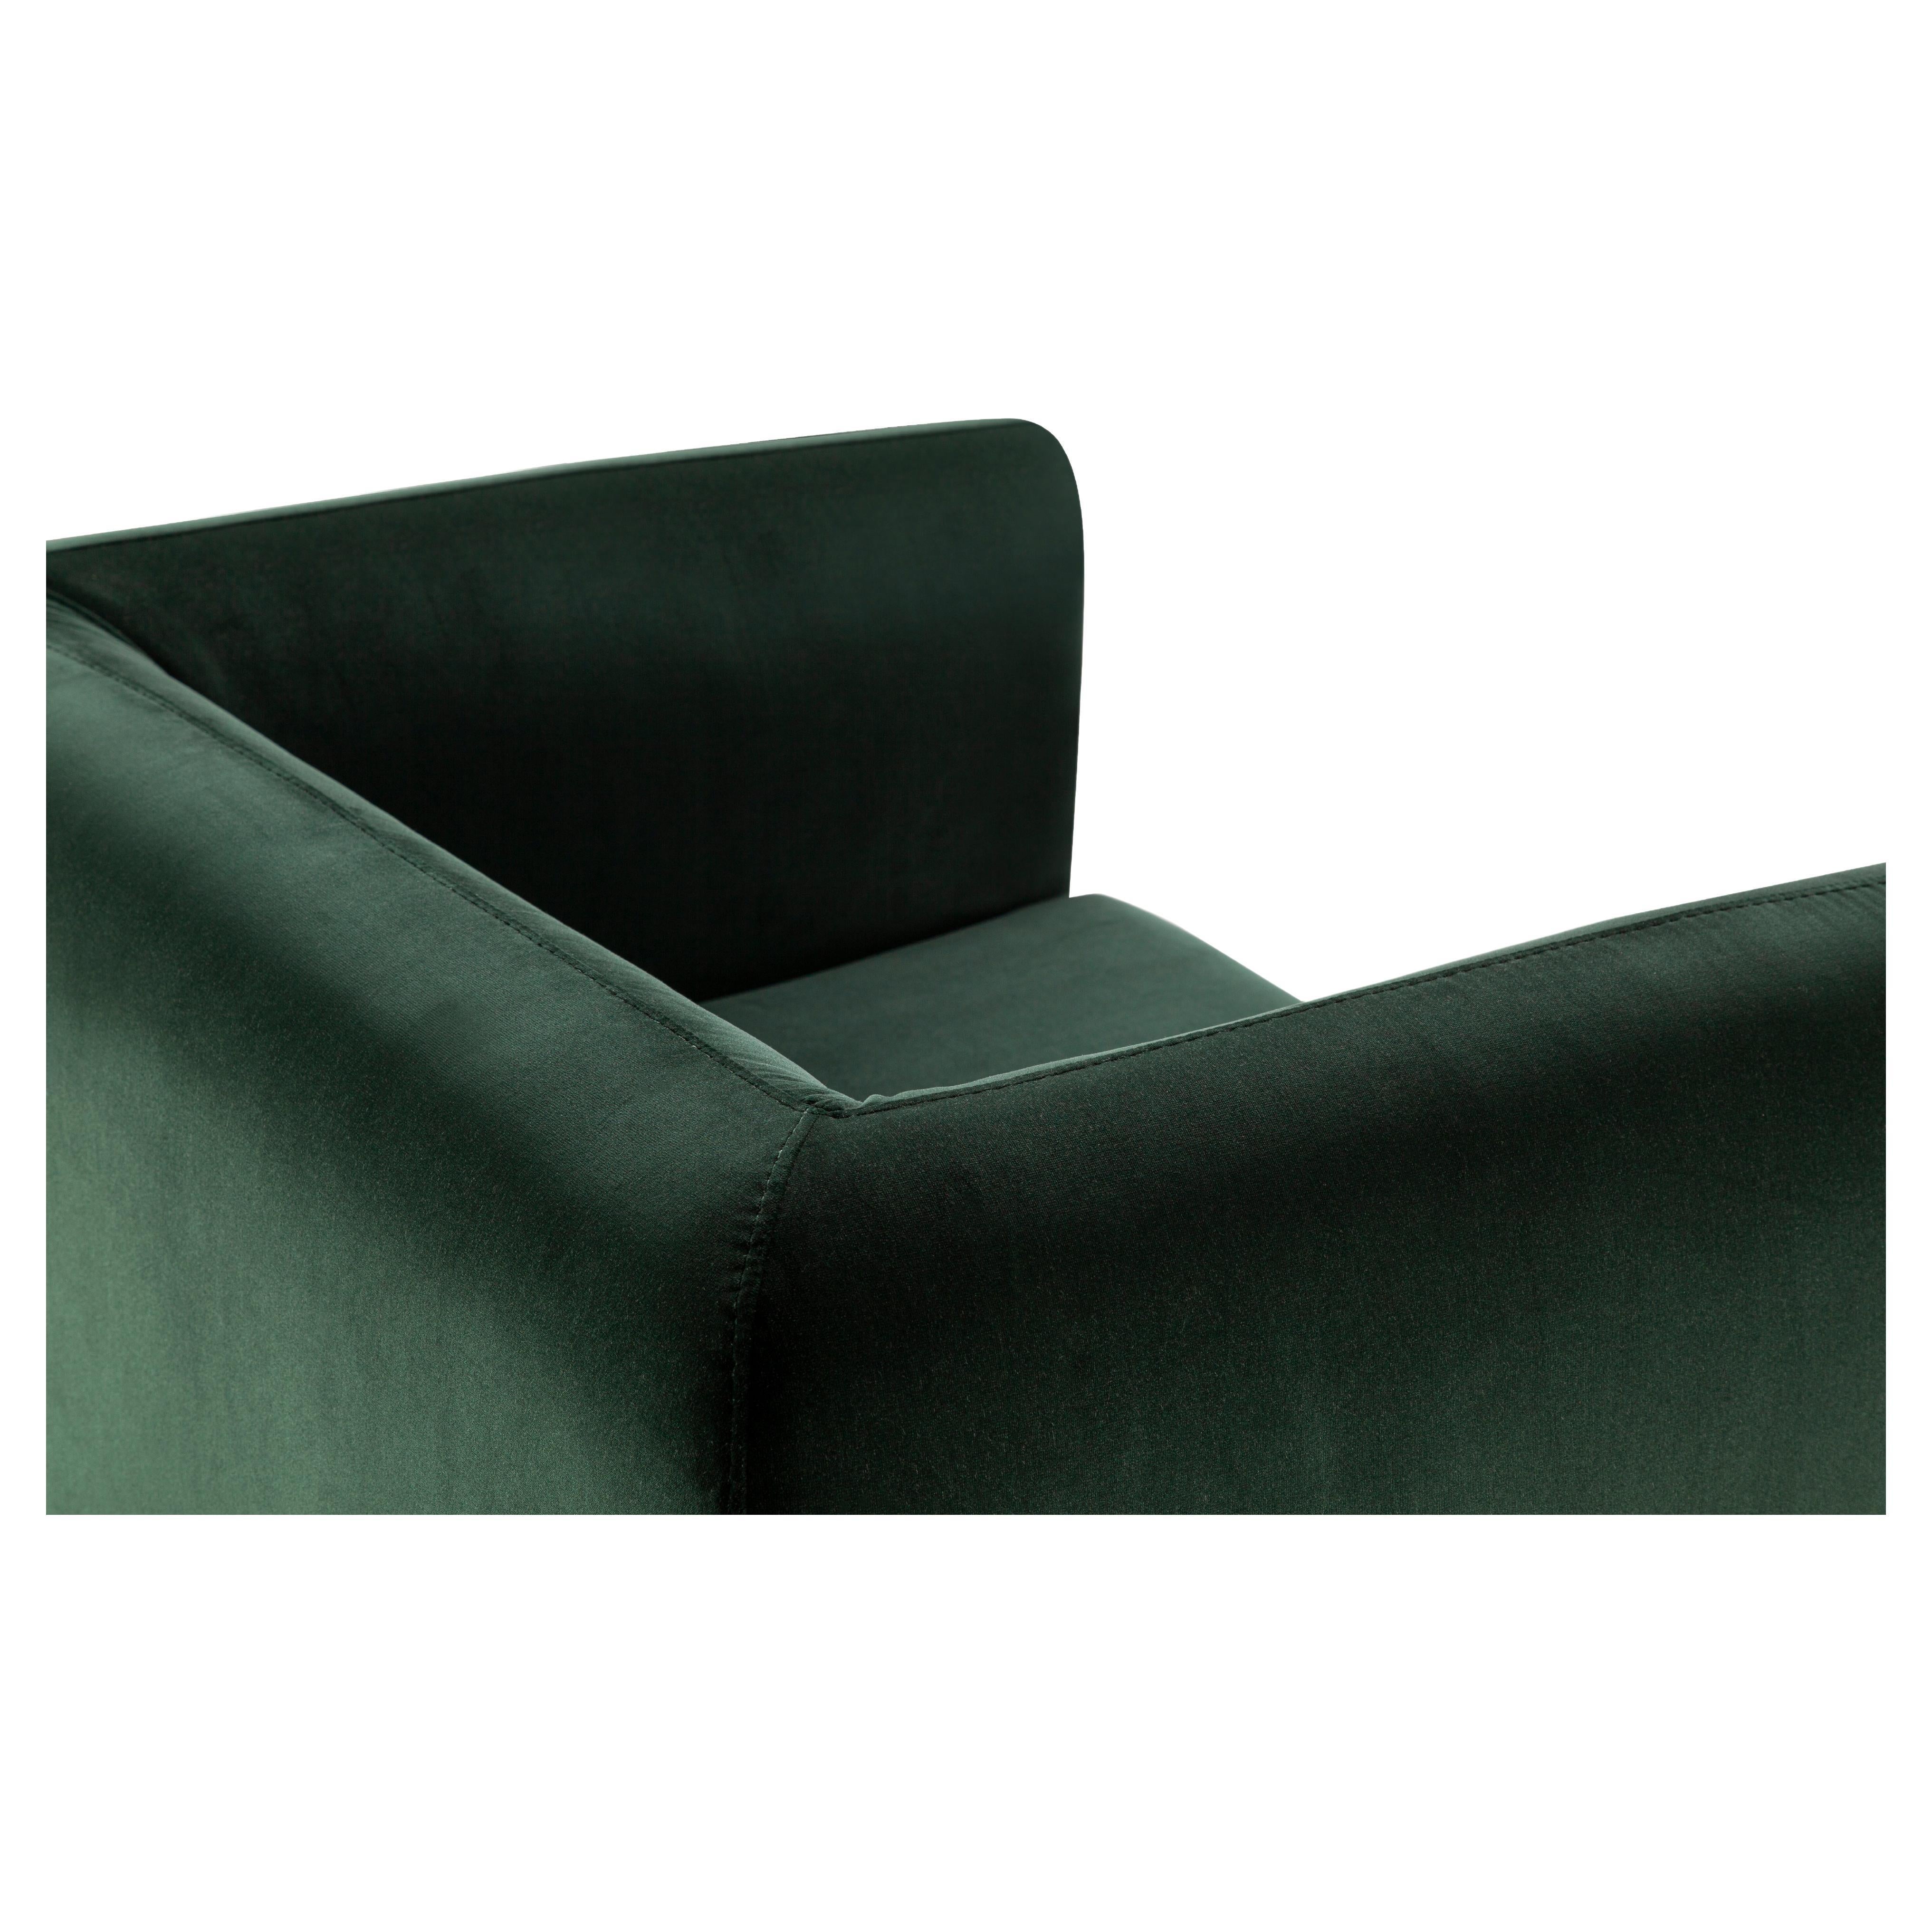 Contemporary Modern Jacob Armchair in Green Velvet Fabric by Collector Studio

This fun and sophisticated 21st century armchair designed by Collector Studio, with its simple shape and attractive color game along with other possible combinations of